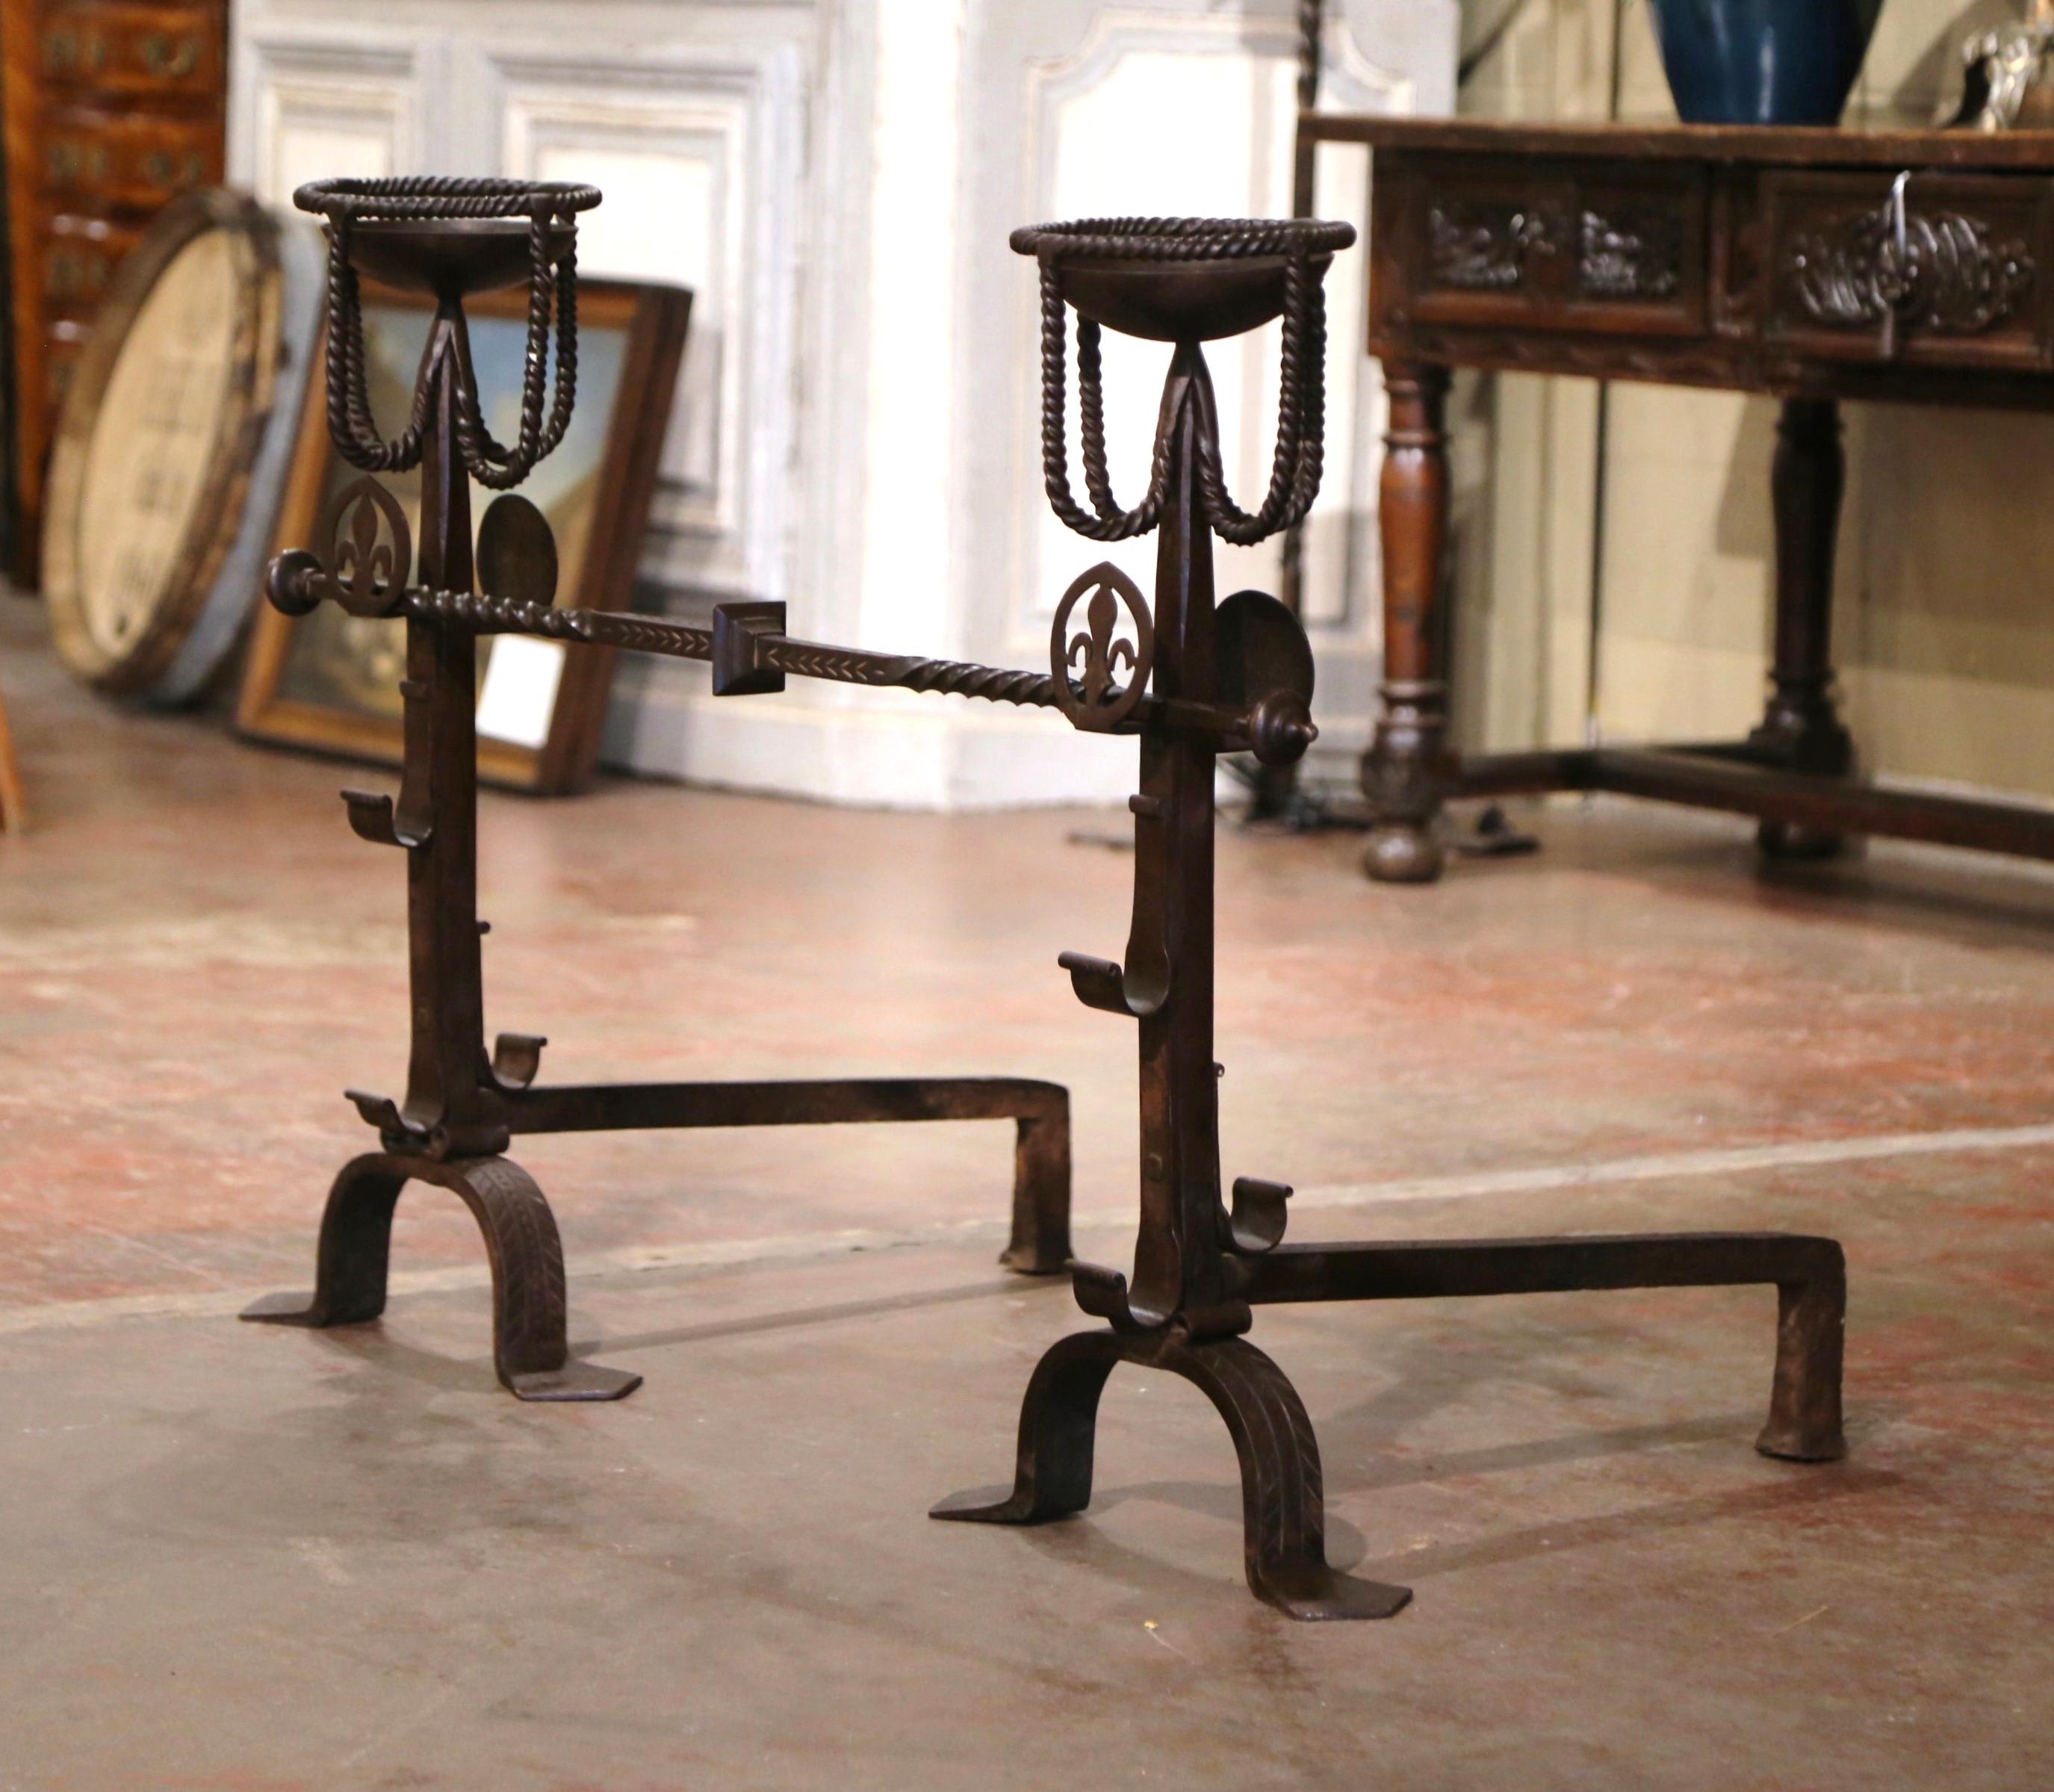 Pair of 19th Century French Wrought Iron “Landiers” Andirons with Fleur de Lys For Sale 1